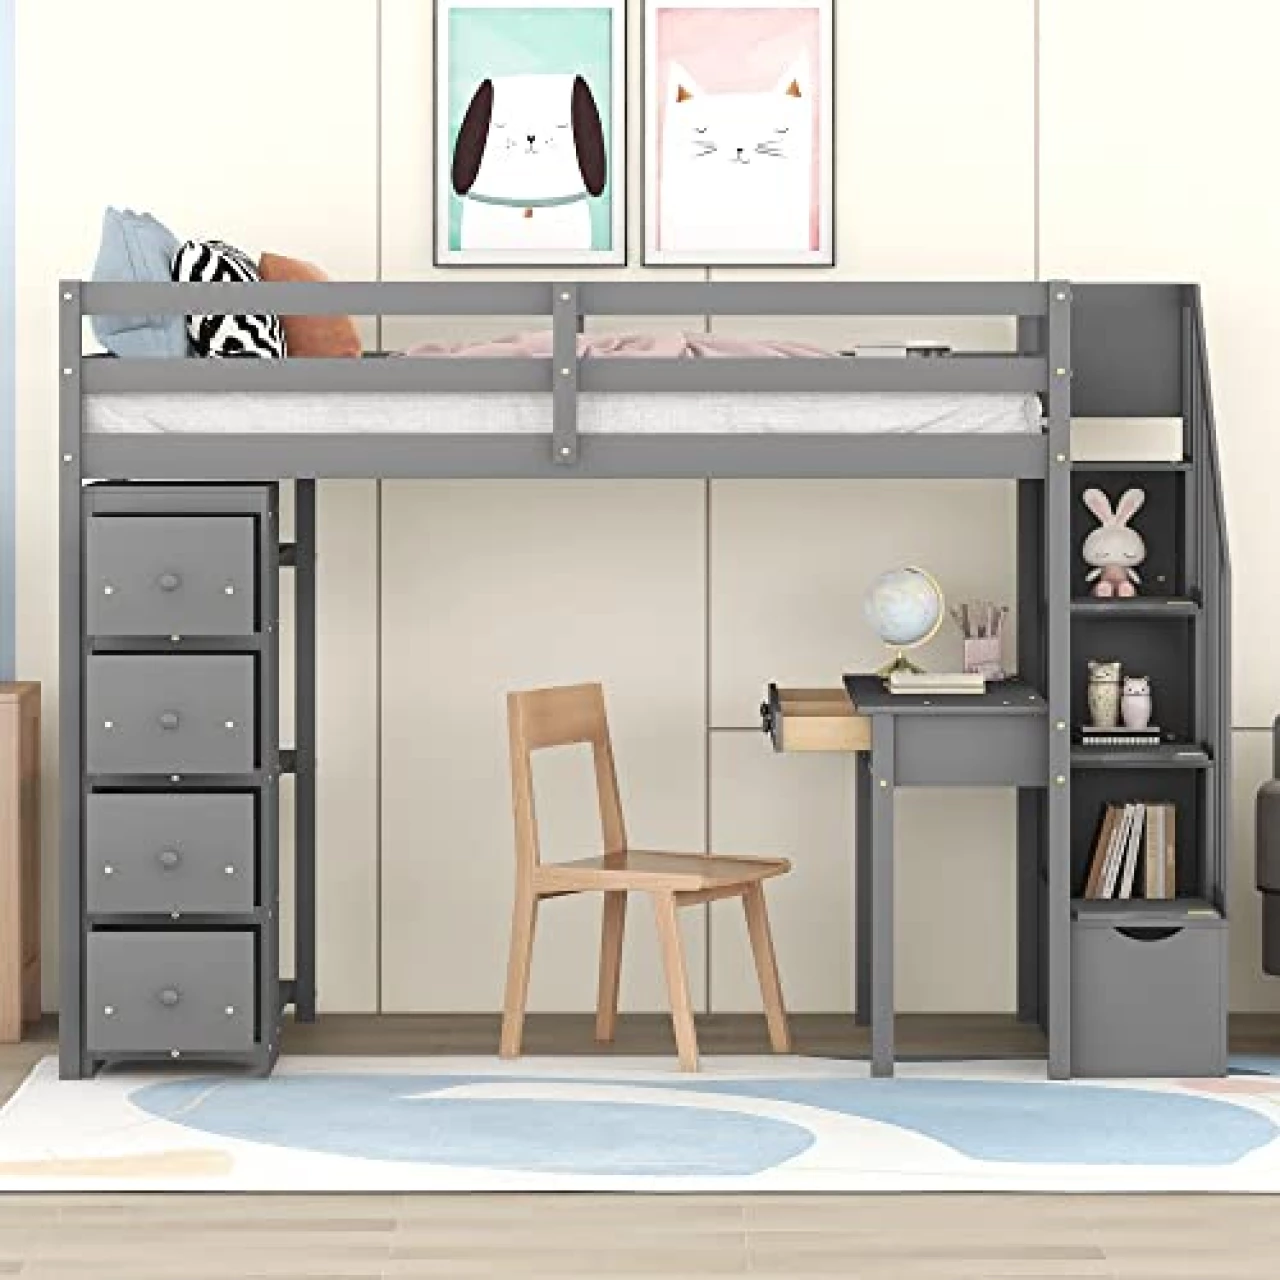 BIADNBZ Wooden Twin Size Loft Bed with Desk, Stairs, Storage Drawers and Shelves, High Loftbed Frame for Kids Teens Bedroom, Gray